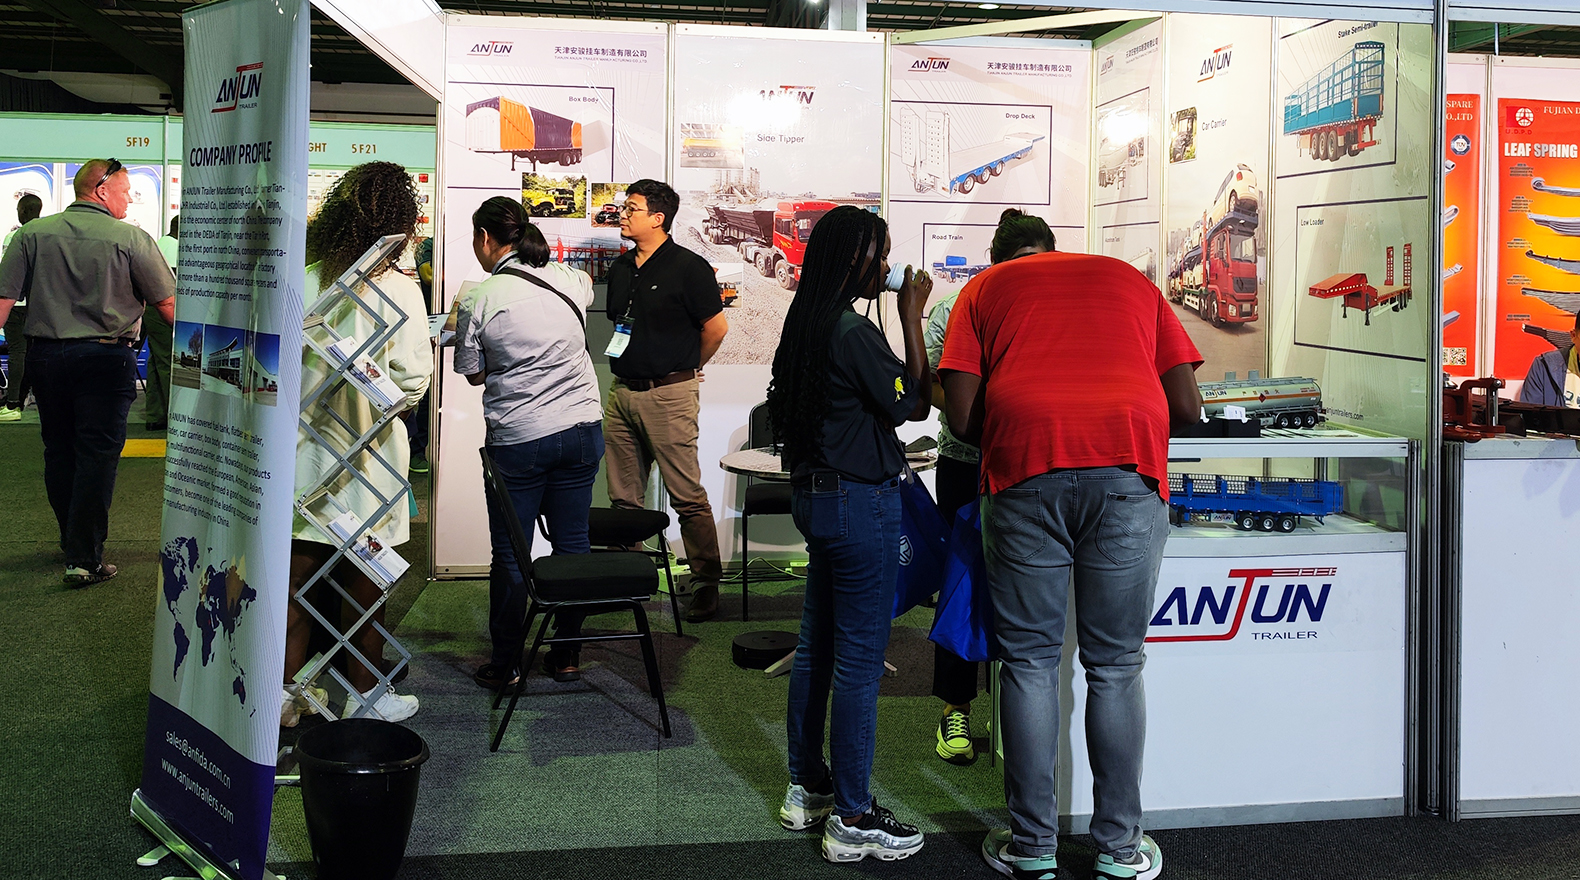  <span style="font-size:16px;"><span style="font-family:Calibri;">2023 South Africa International Commercial Vehicle Exhibition</span></span> 